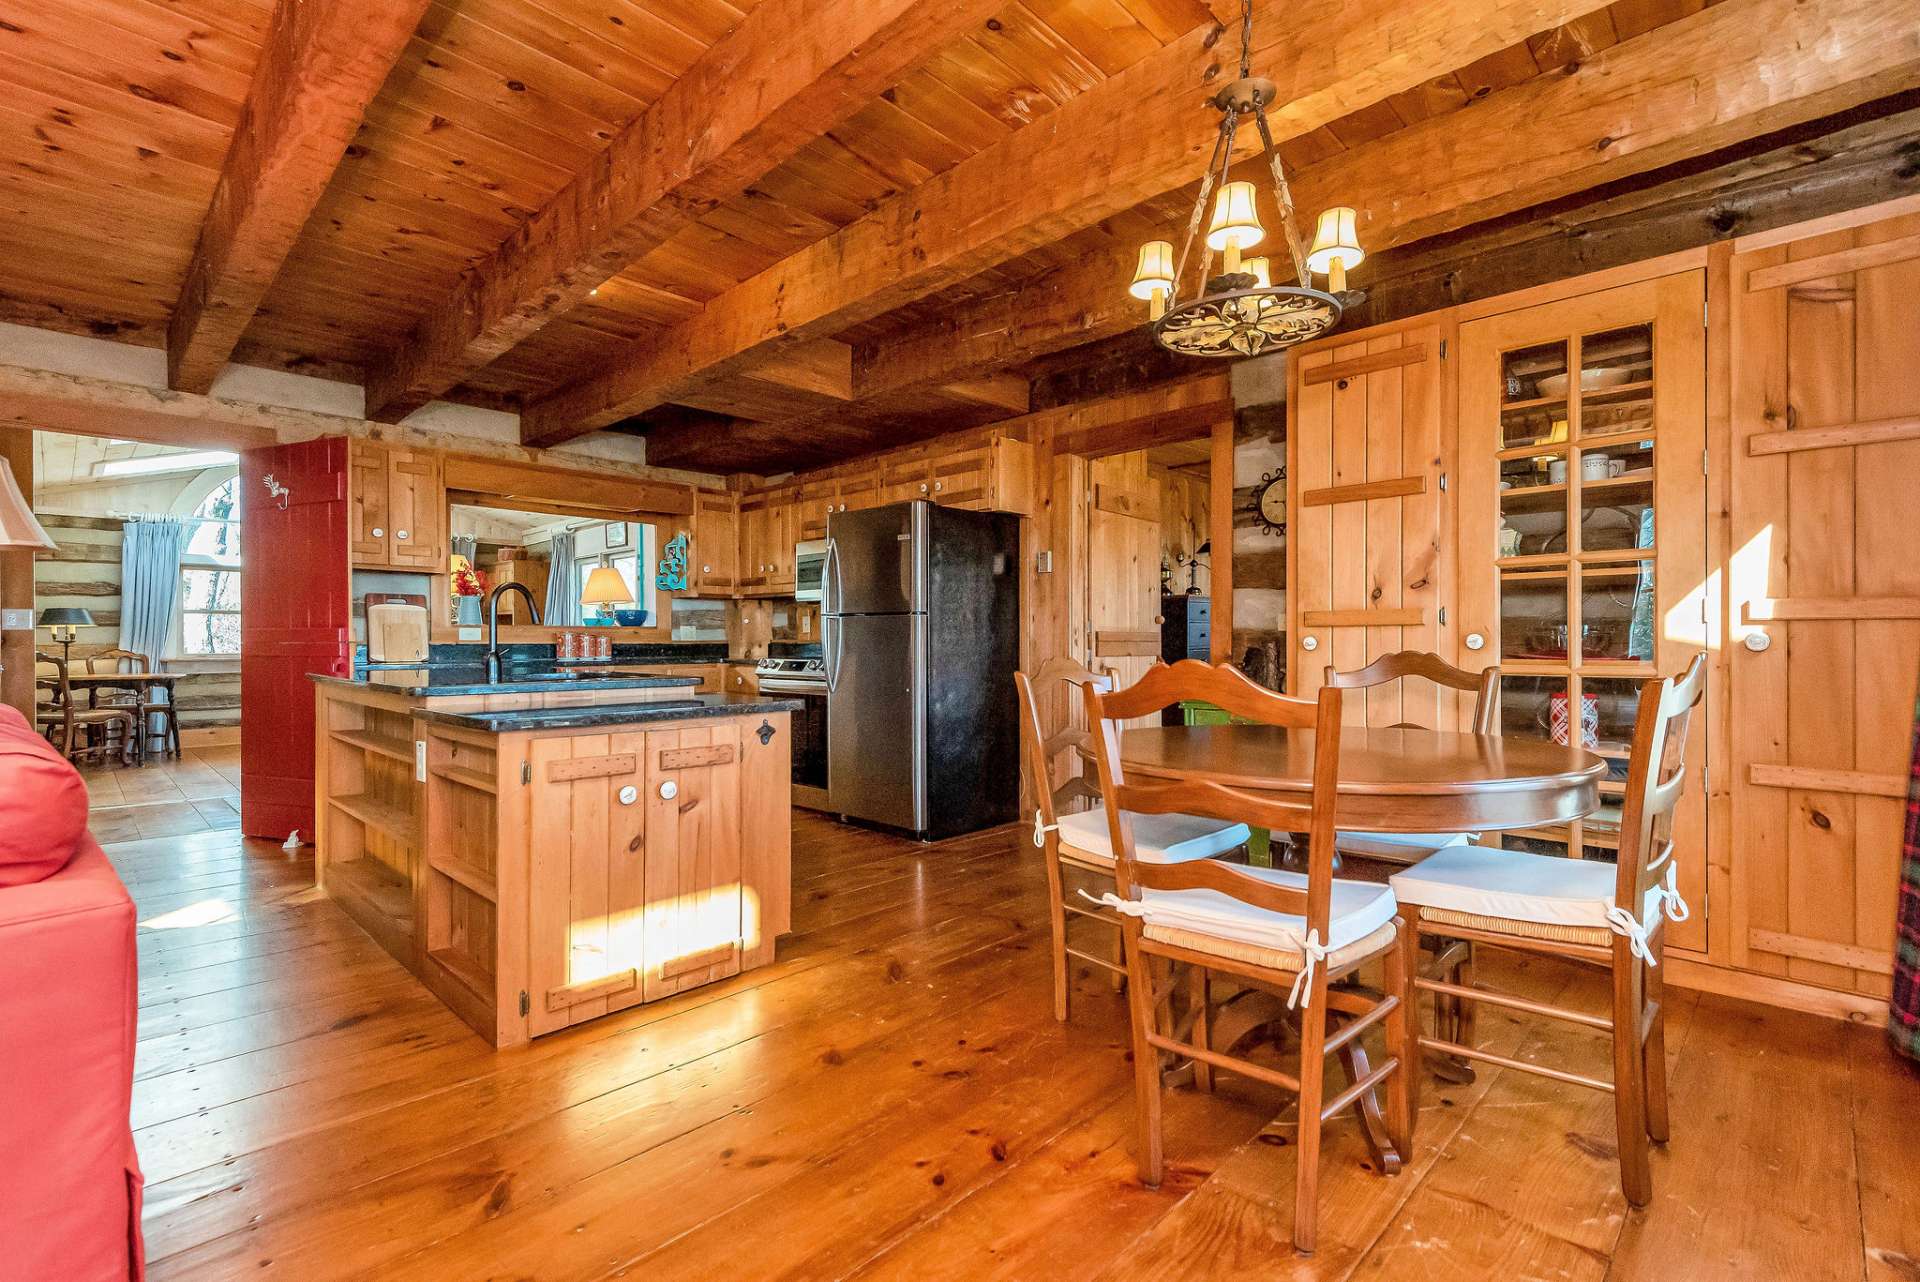 This home is adorned with custom built-ins throughout creating ample storage and charm.